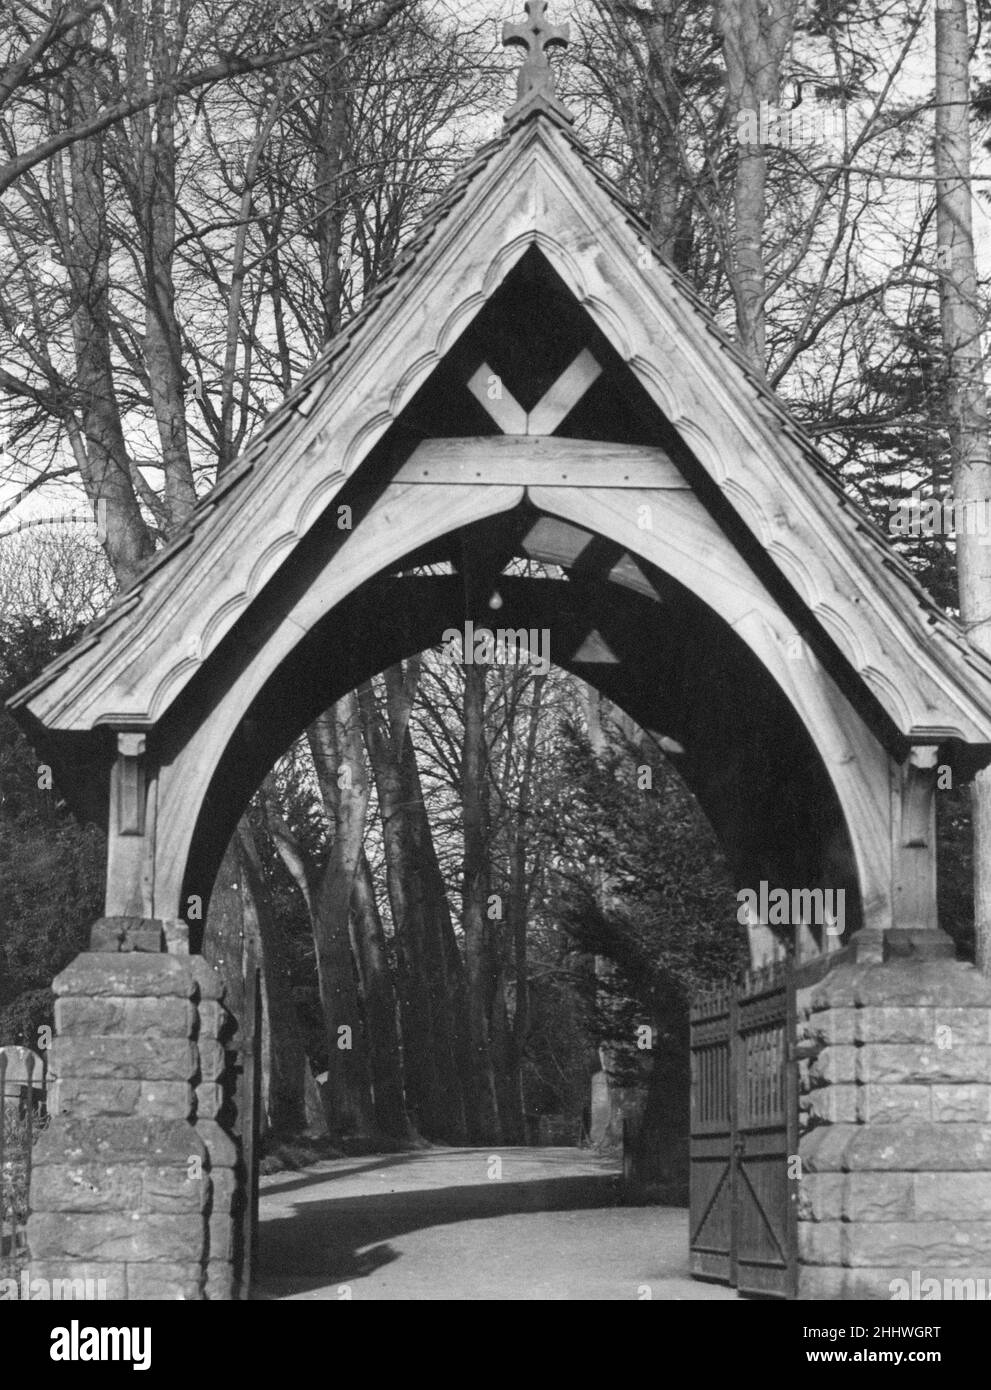 Lych Gate at Brecon Cathedral, Brecon, a market town and community in Powys, Mid Wales, 15th April 1955. Brecon Cathedral is the cathedral of the Diocese of Swansea and Brecon in the Church in Wales and seat of the Bishop of Swansea and Brecon. Stock Photo